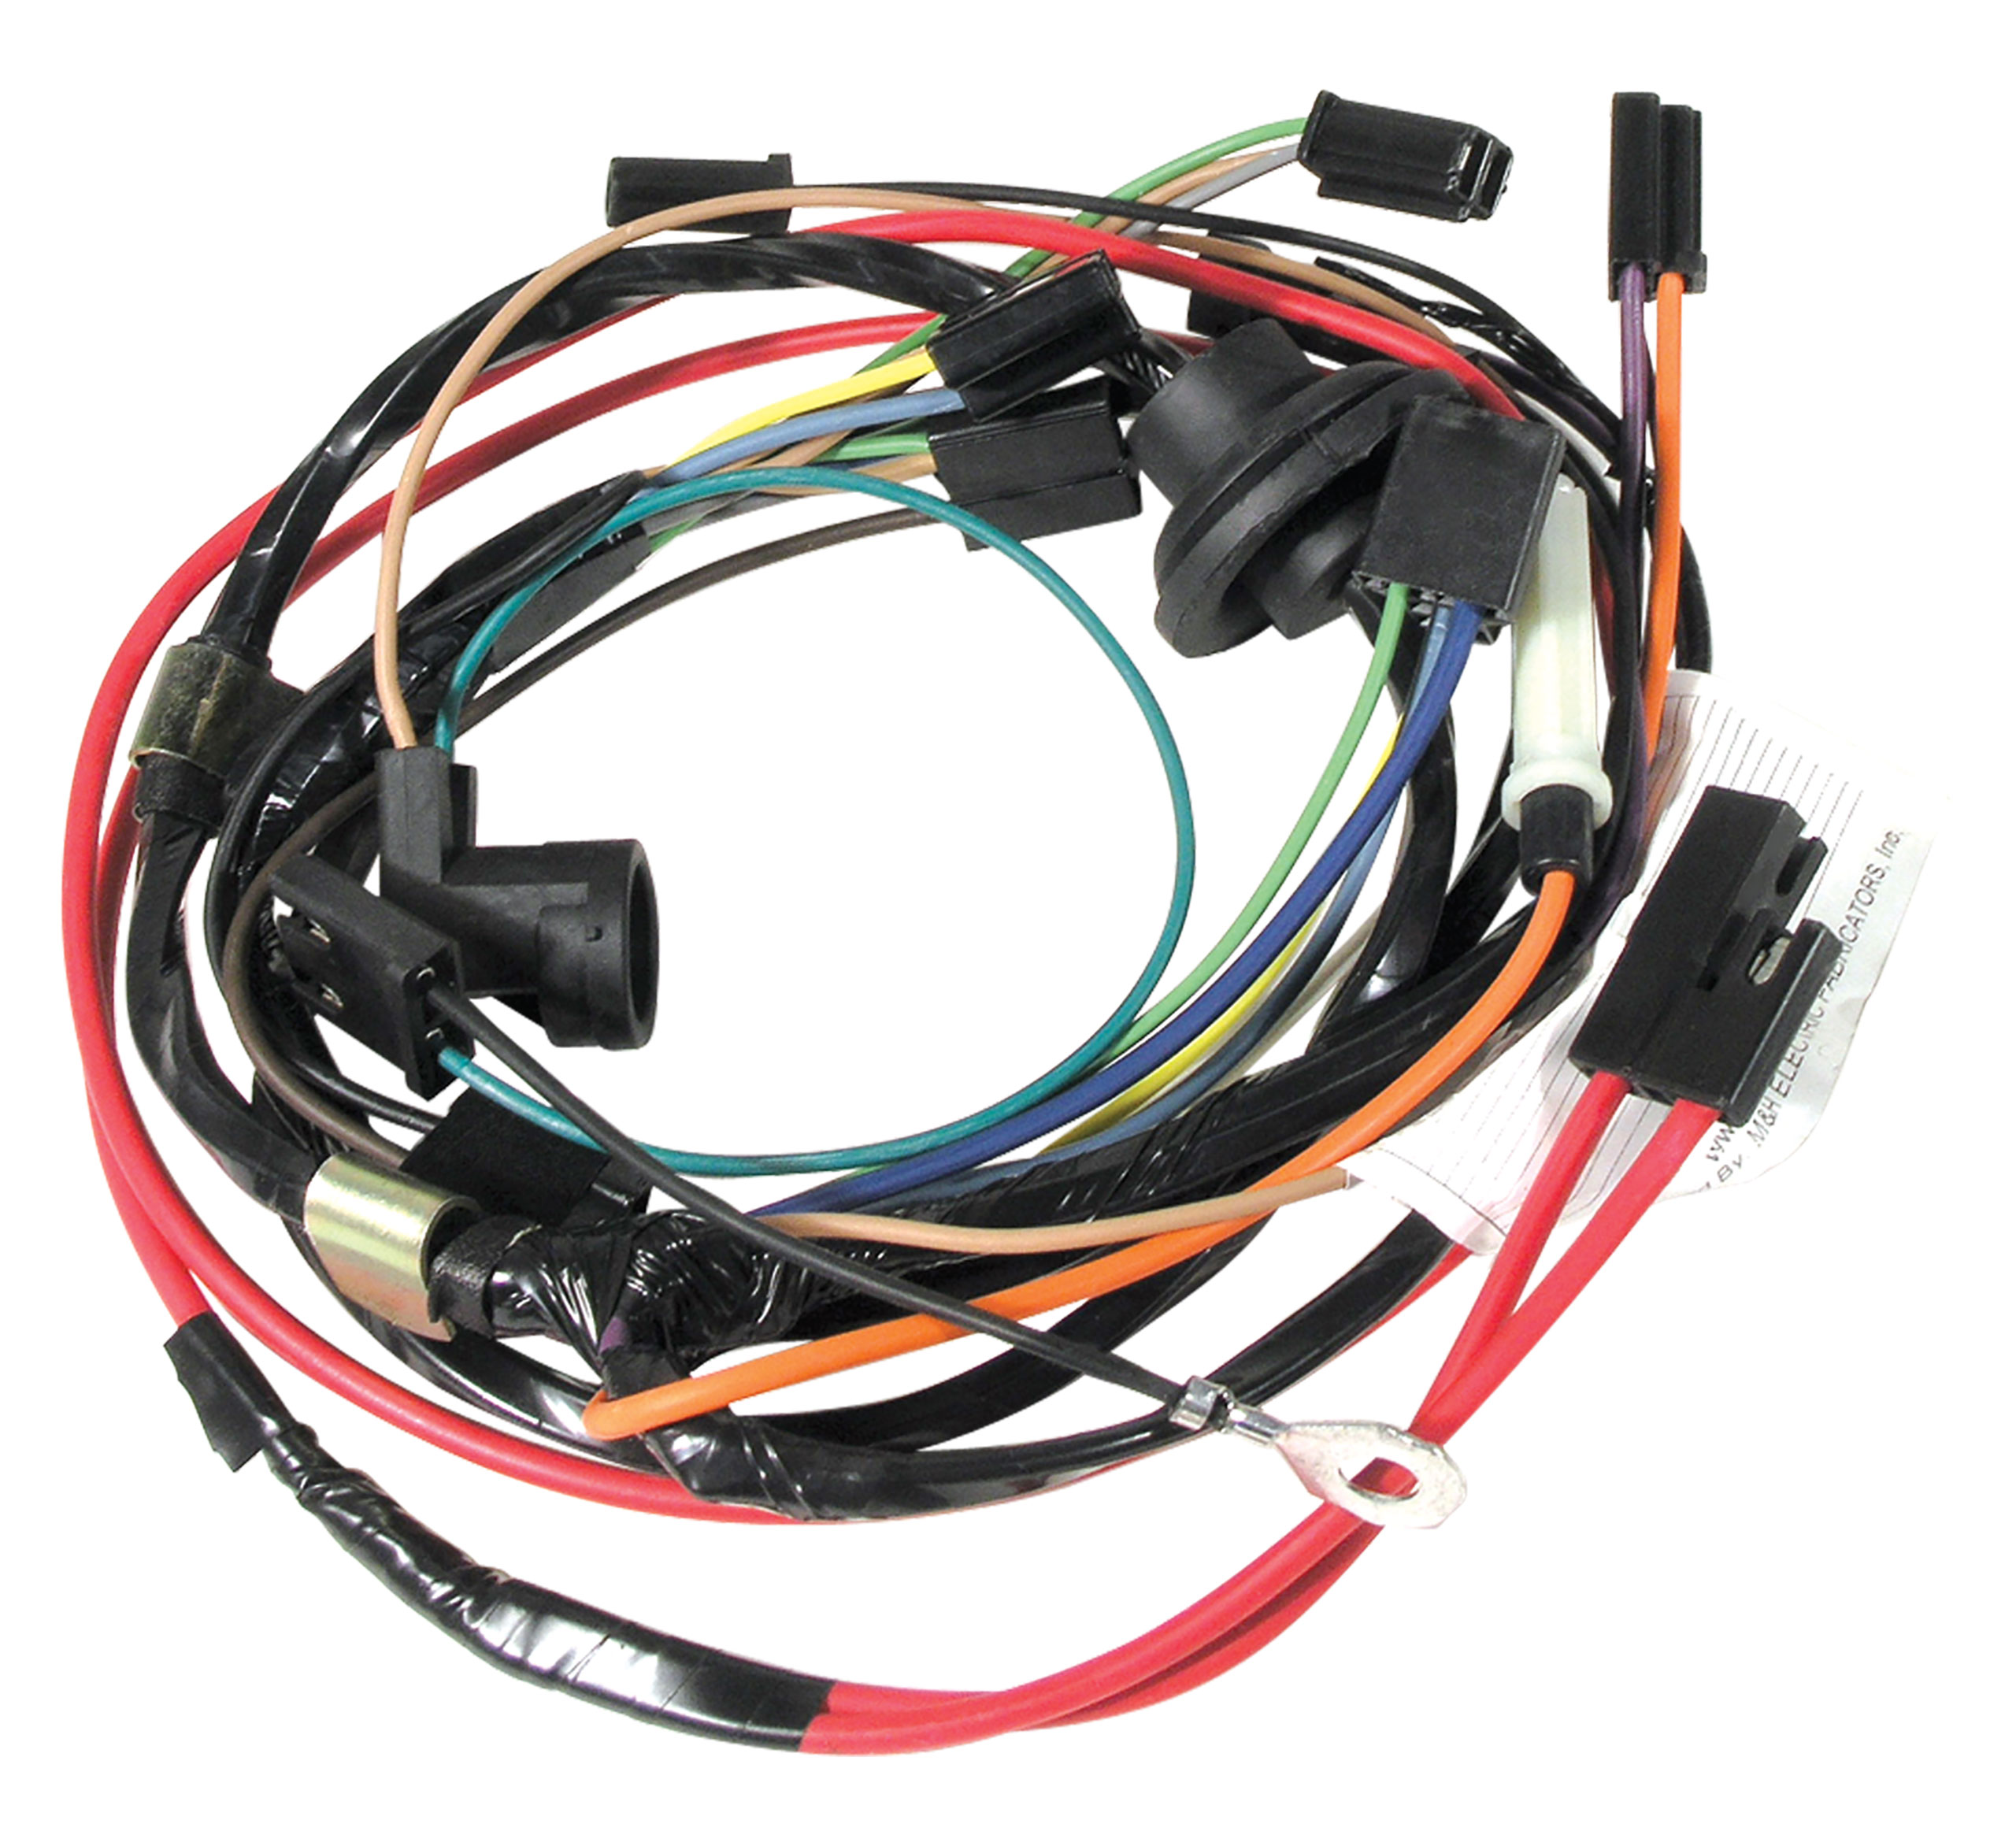 C3 1975 Chevrolet Corvette Harness. Air Conditioning W/Heater Wiring - Lectric Limited, Inc.